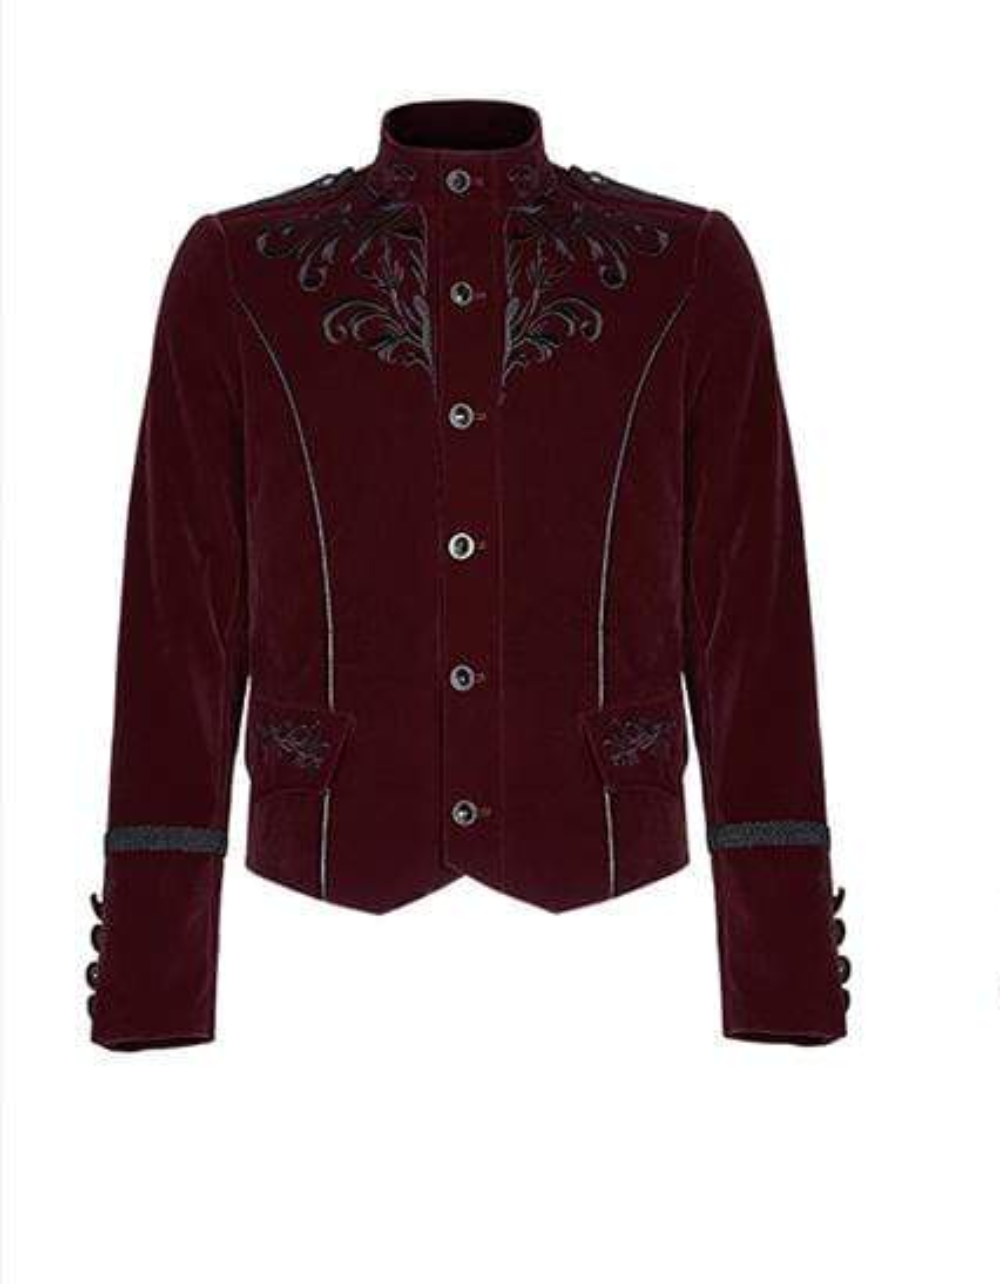 Embroidered Single Breasted Gothic velvet jacket which is designed and made for you specially. It has button closure and looks very dope. This velvet gothic jacket comes in red color.